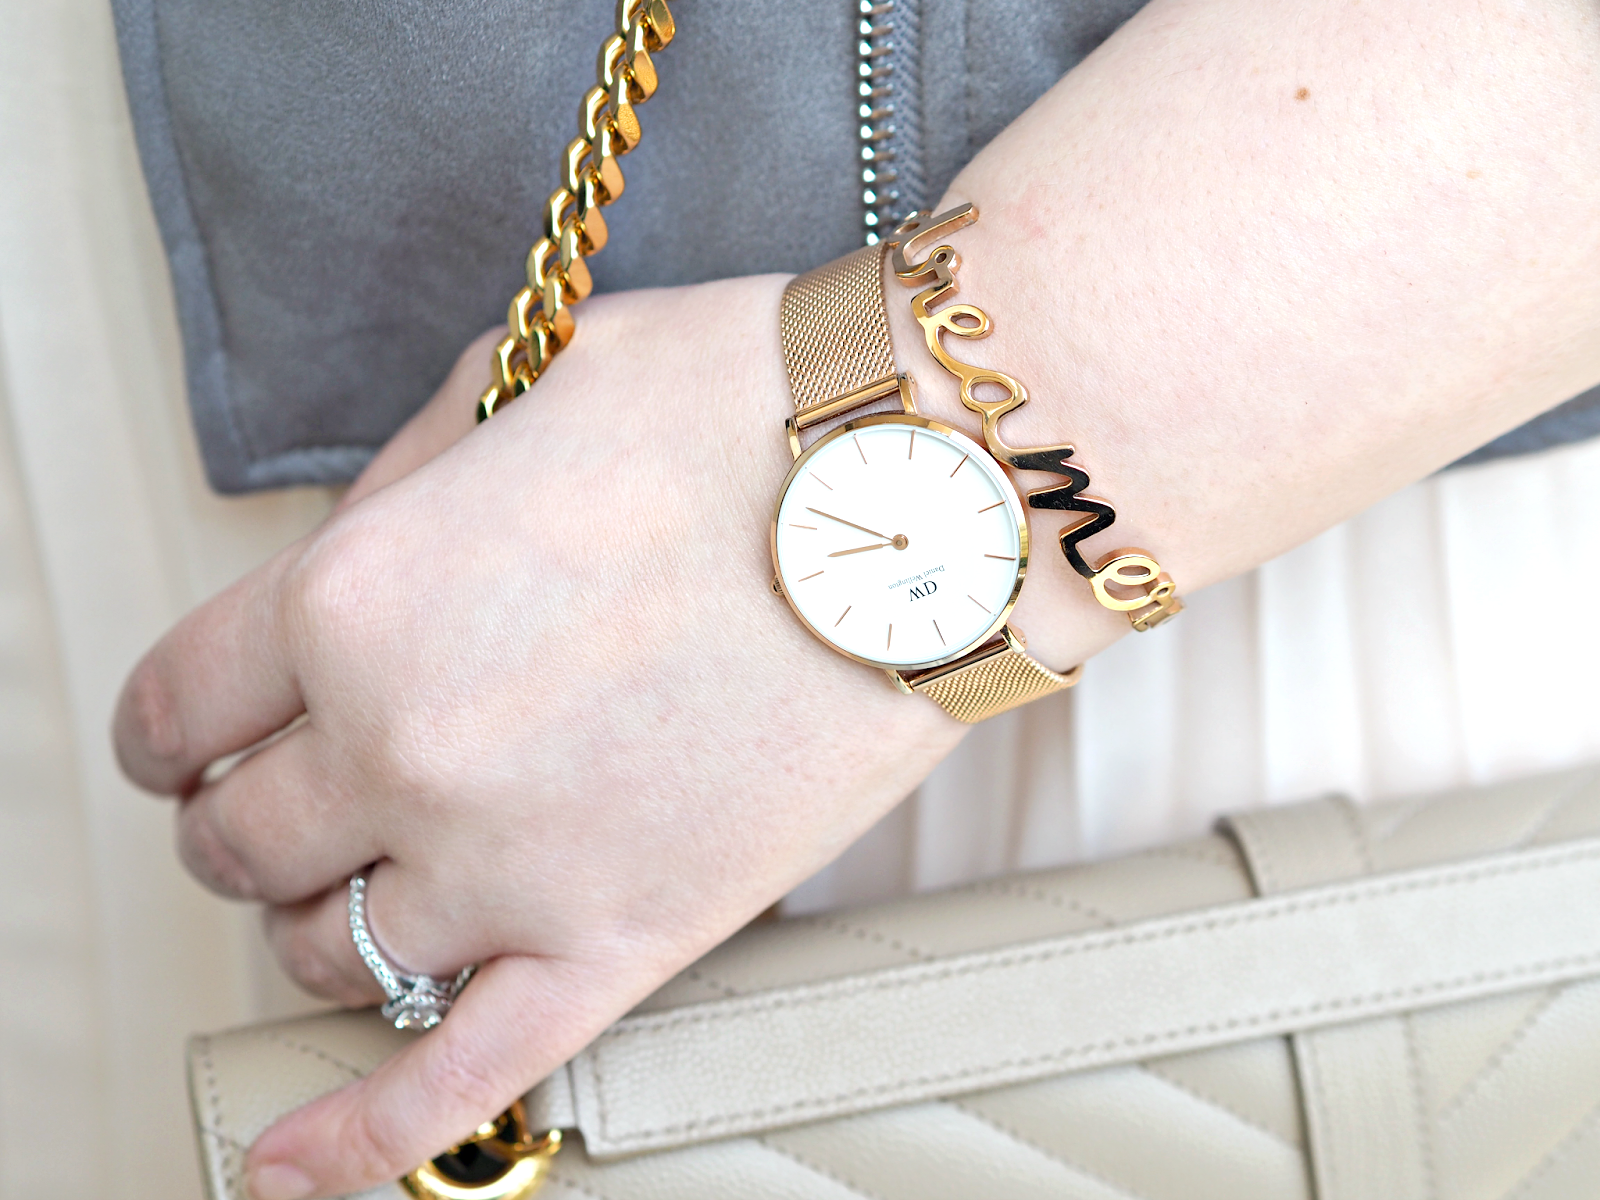 OOTD: Spring Has Sprung (A Blush Toned Outfit & A New Watch From Daniel Wellington)